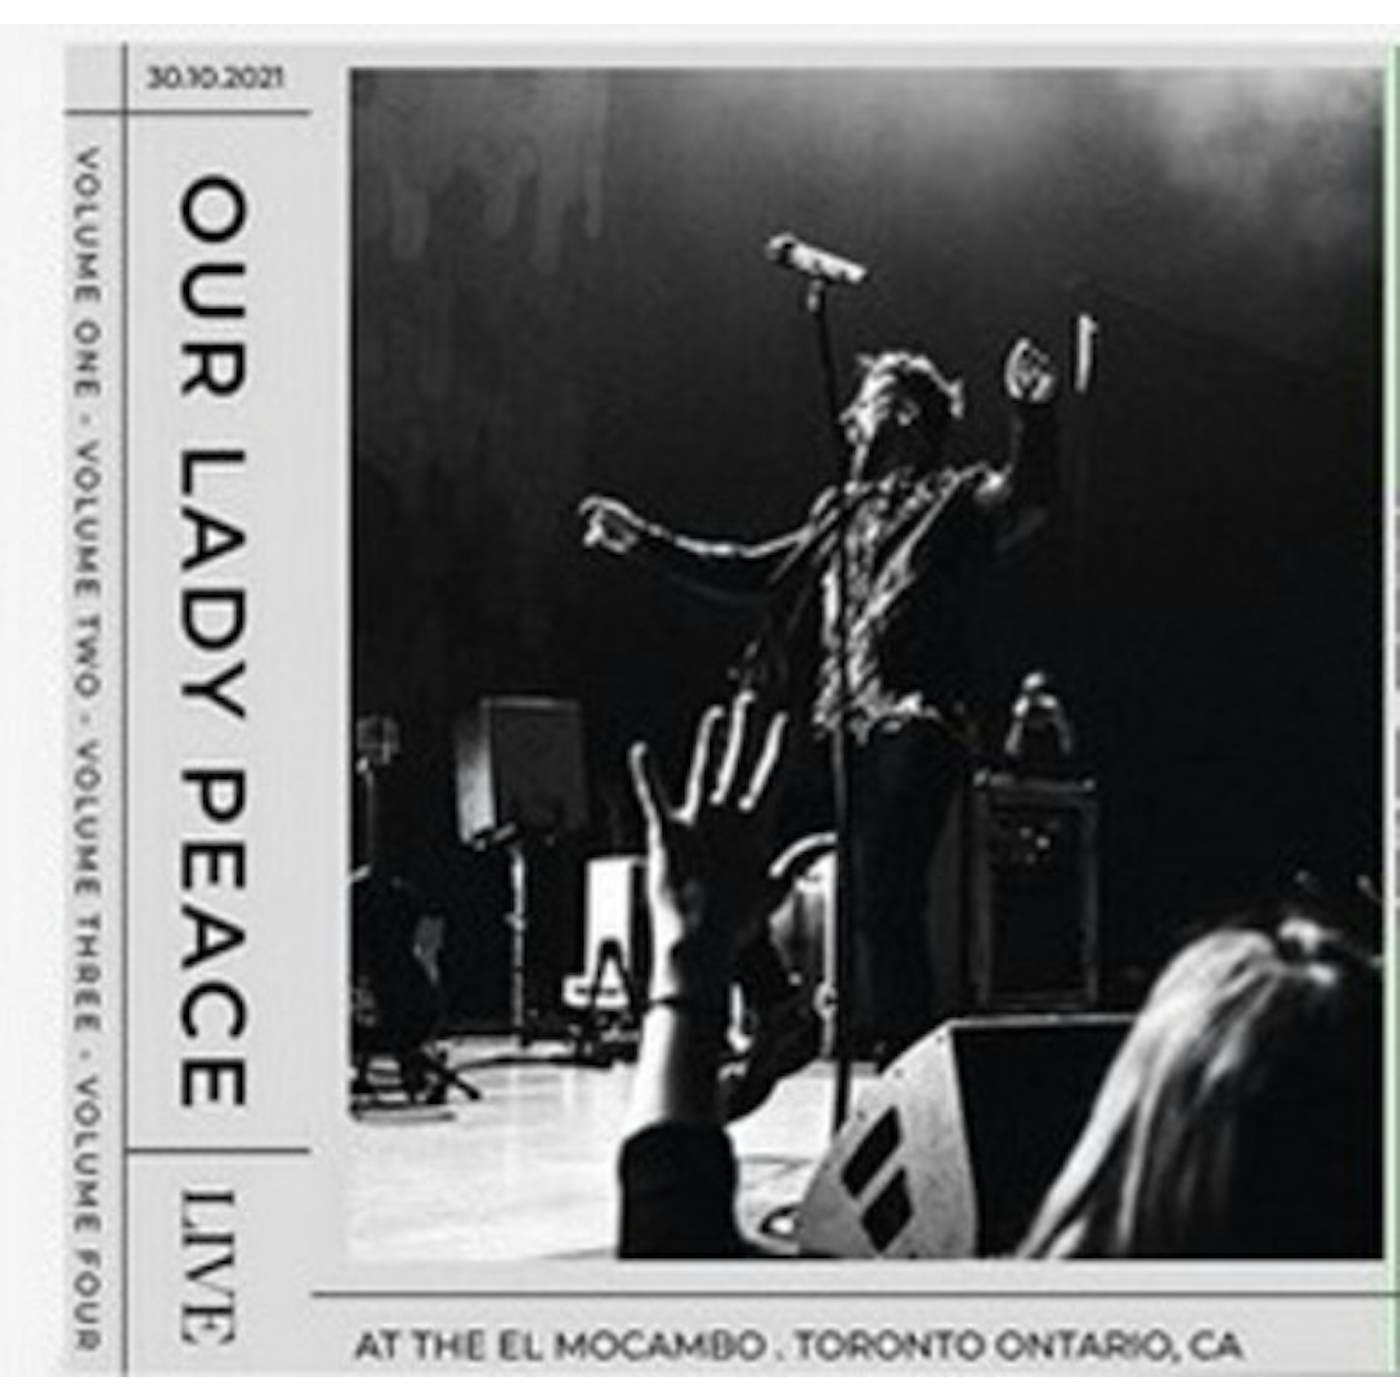 Our Lady Peace LIVE AT THE EL MOCAMBO Vinyl Record